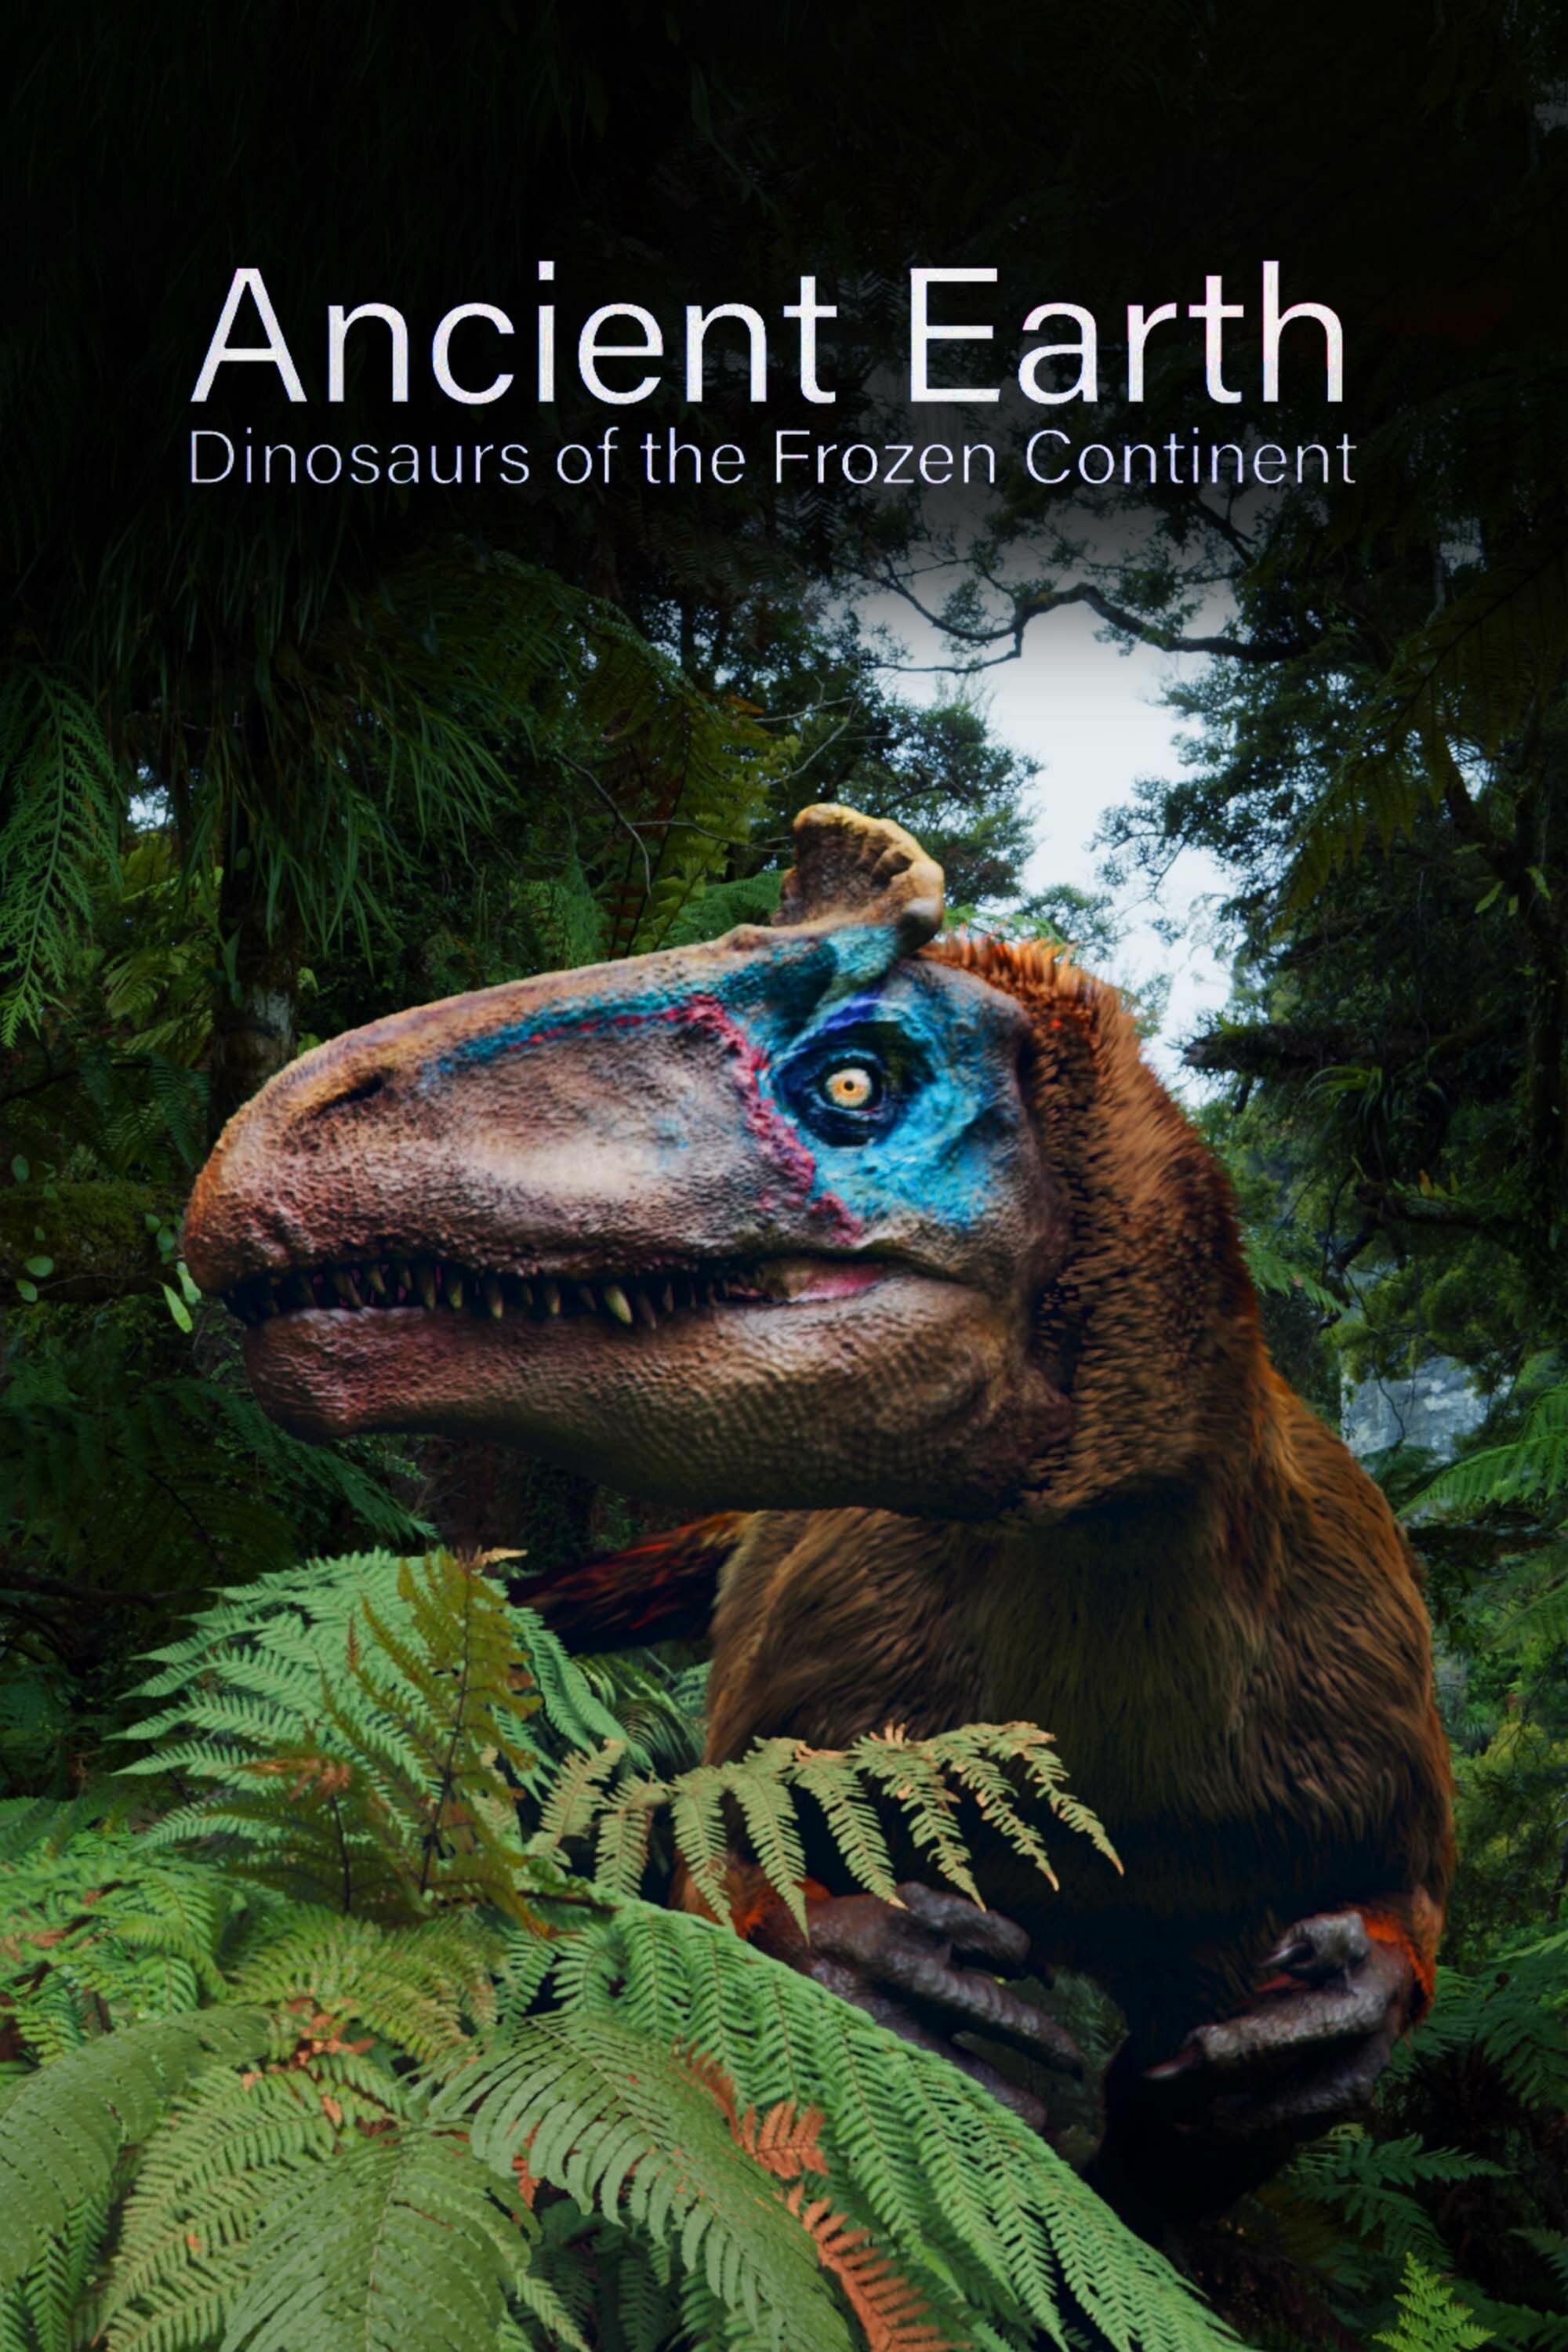 Ancient Earth: Dinosaurs of the Frozen Continent ne zaman